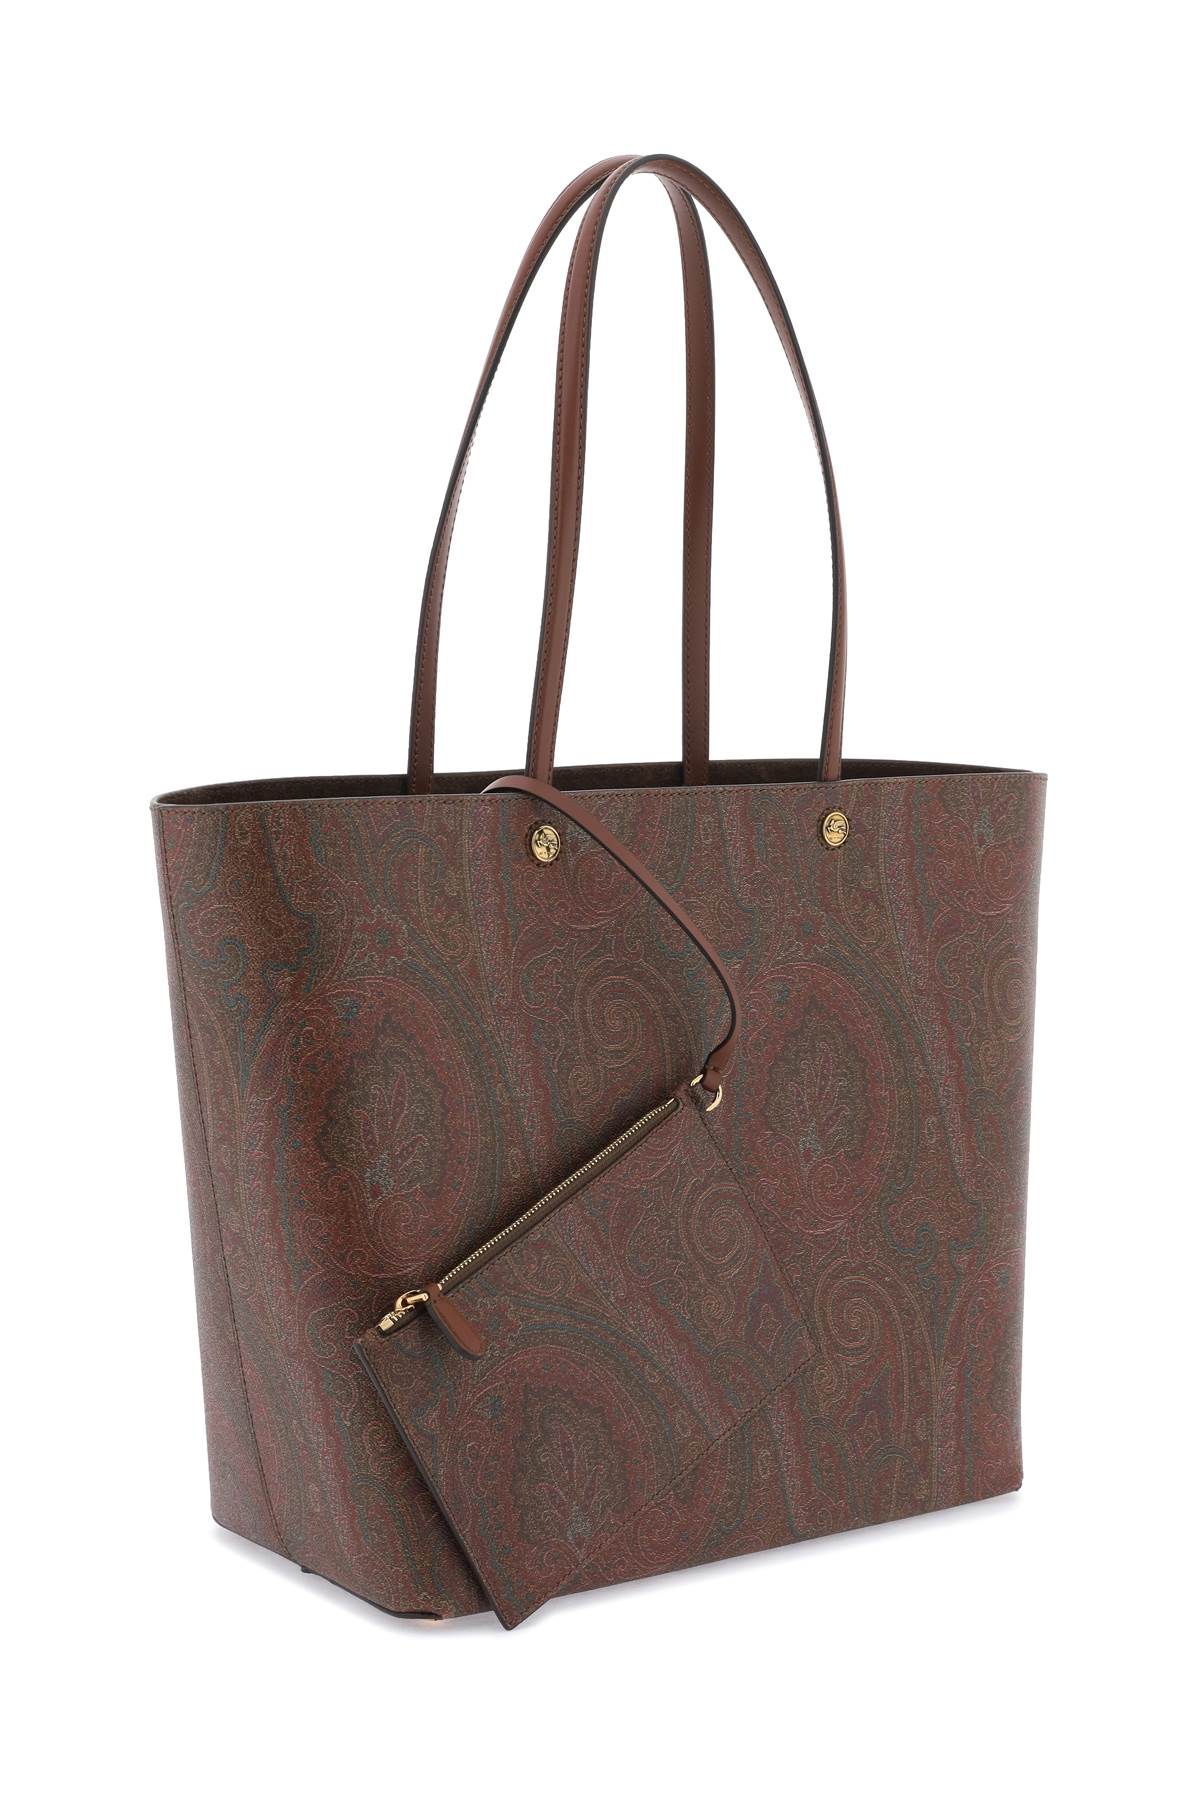 ETRO Essential Paisley Jacquard Large Tote with Leather Accents and Suede Interior, Multicolor